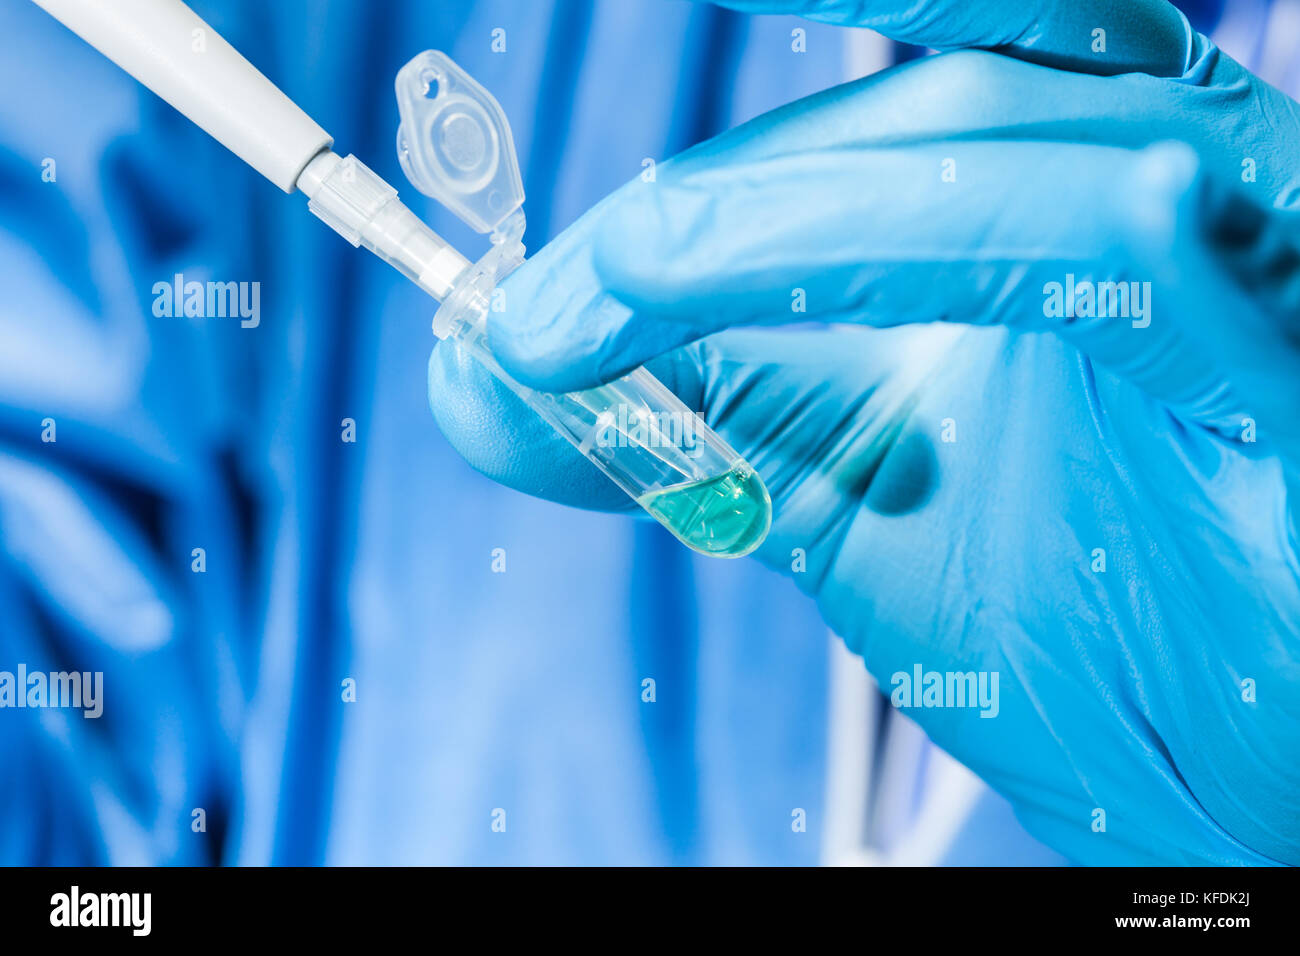 Scientist holding an eppendorf tube and pipette Stock Photo